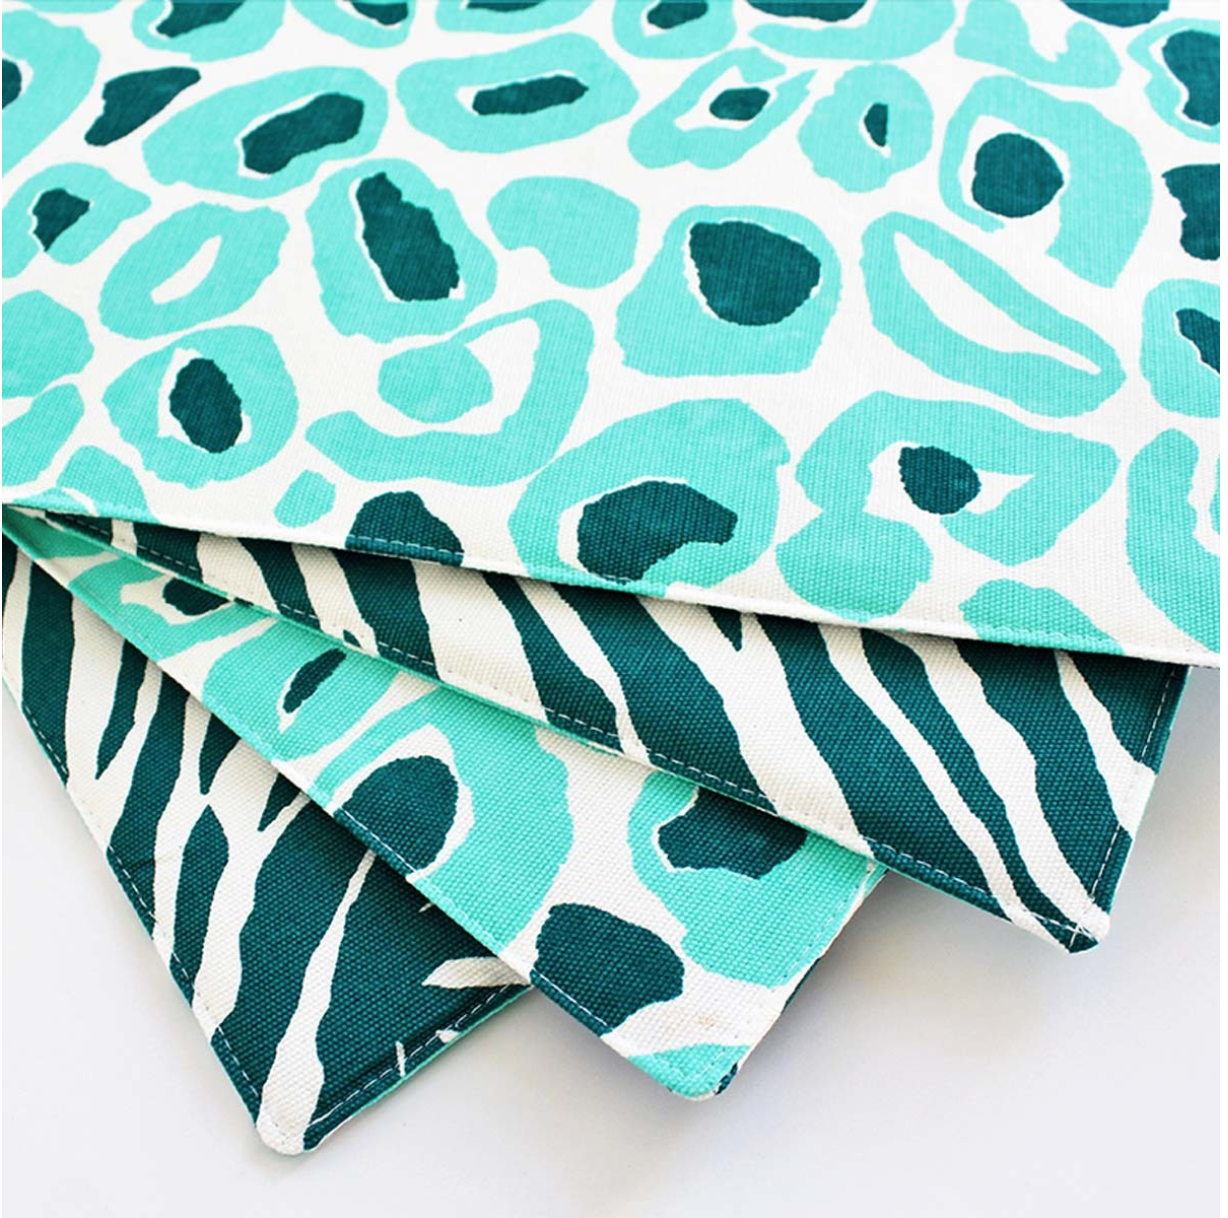 Leopard and Zebra Placemats